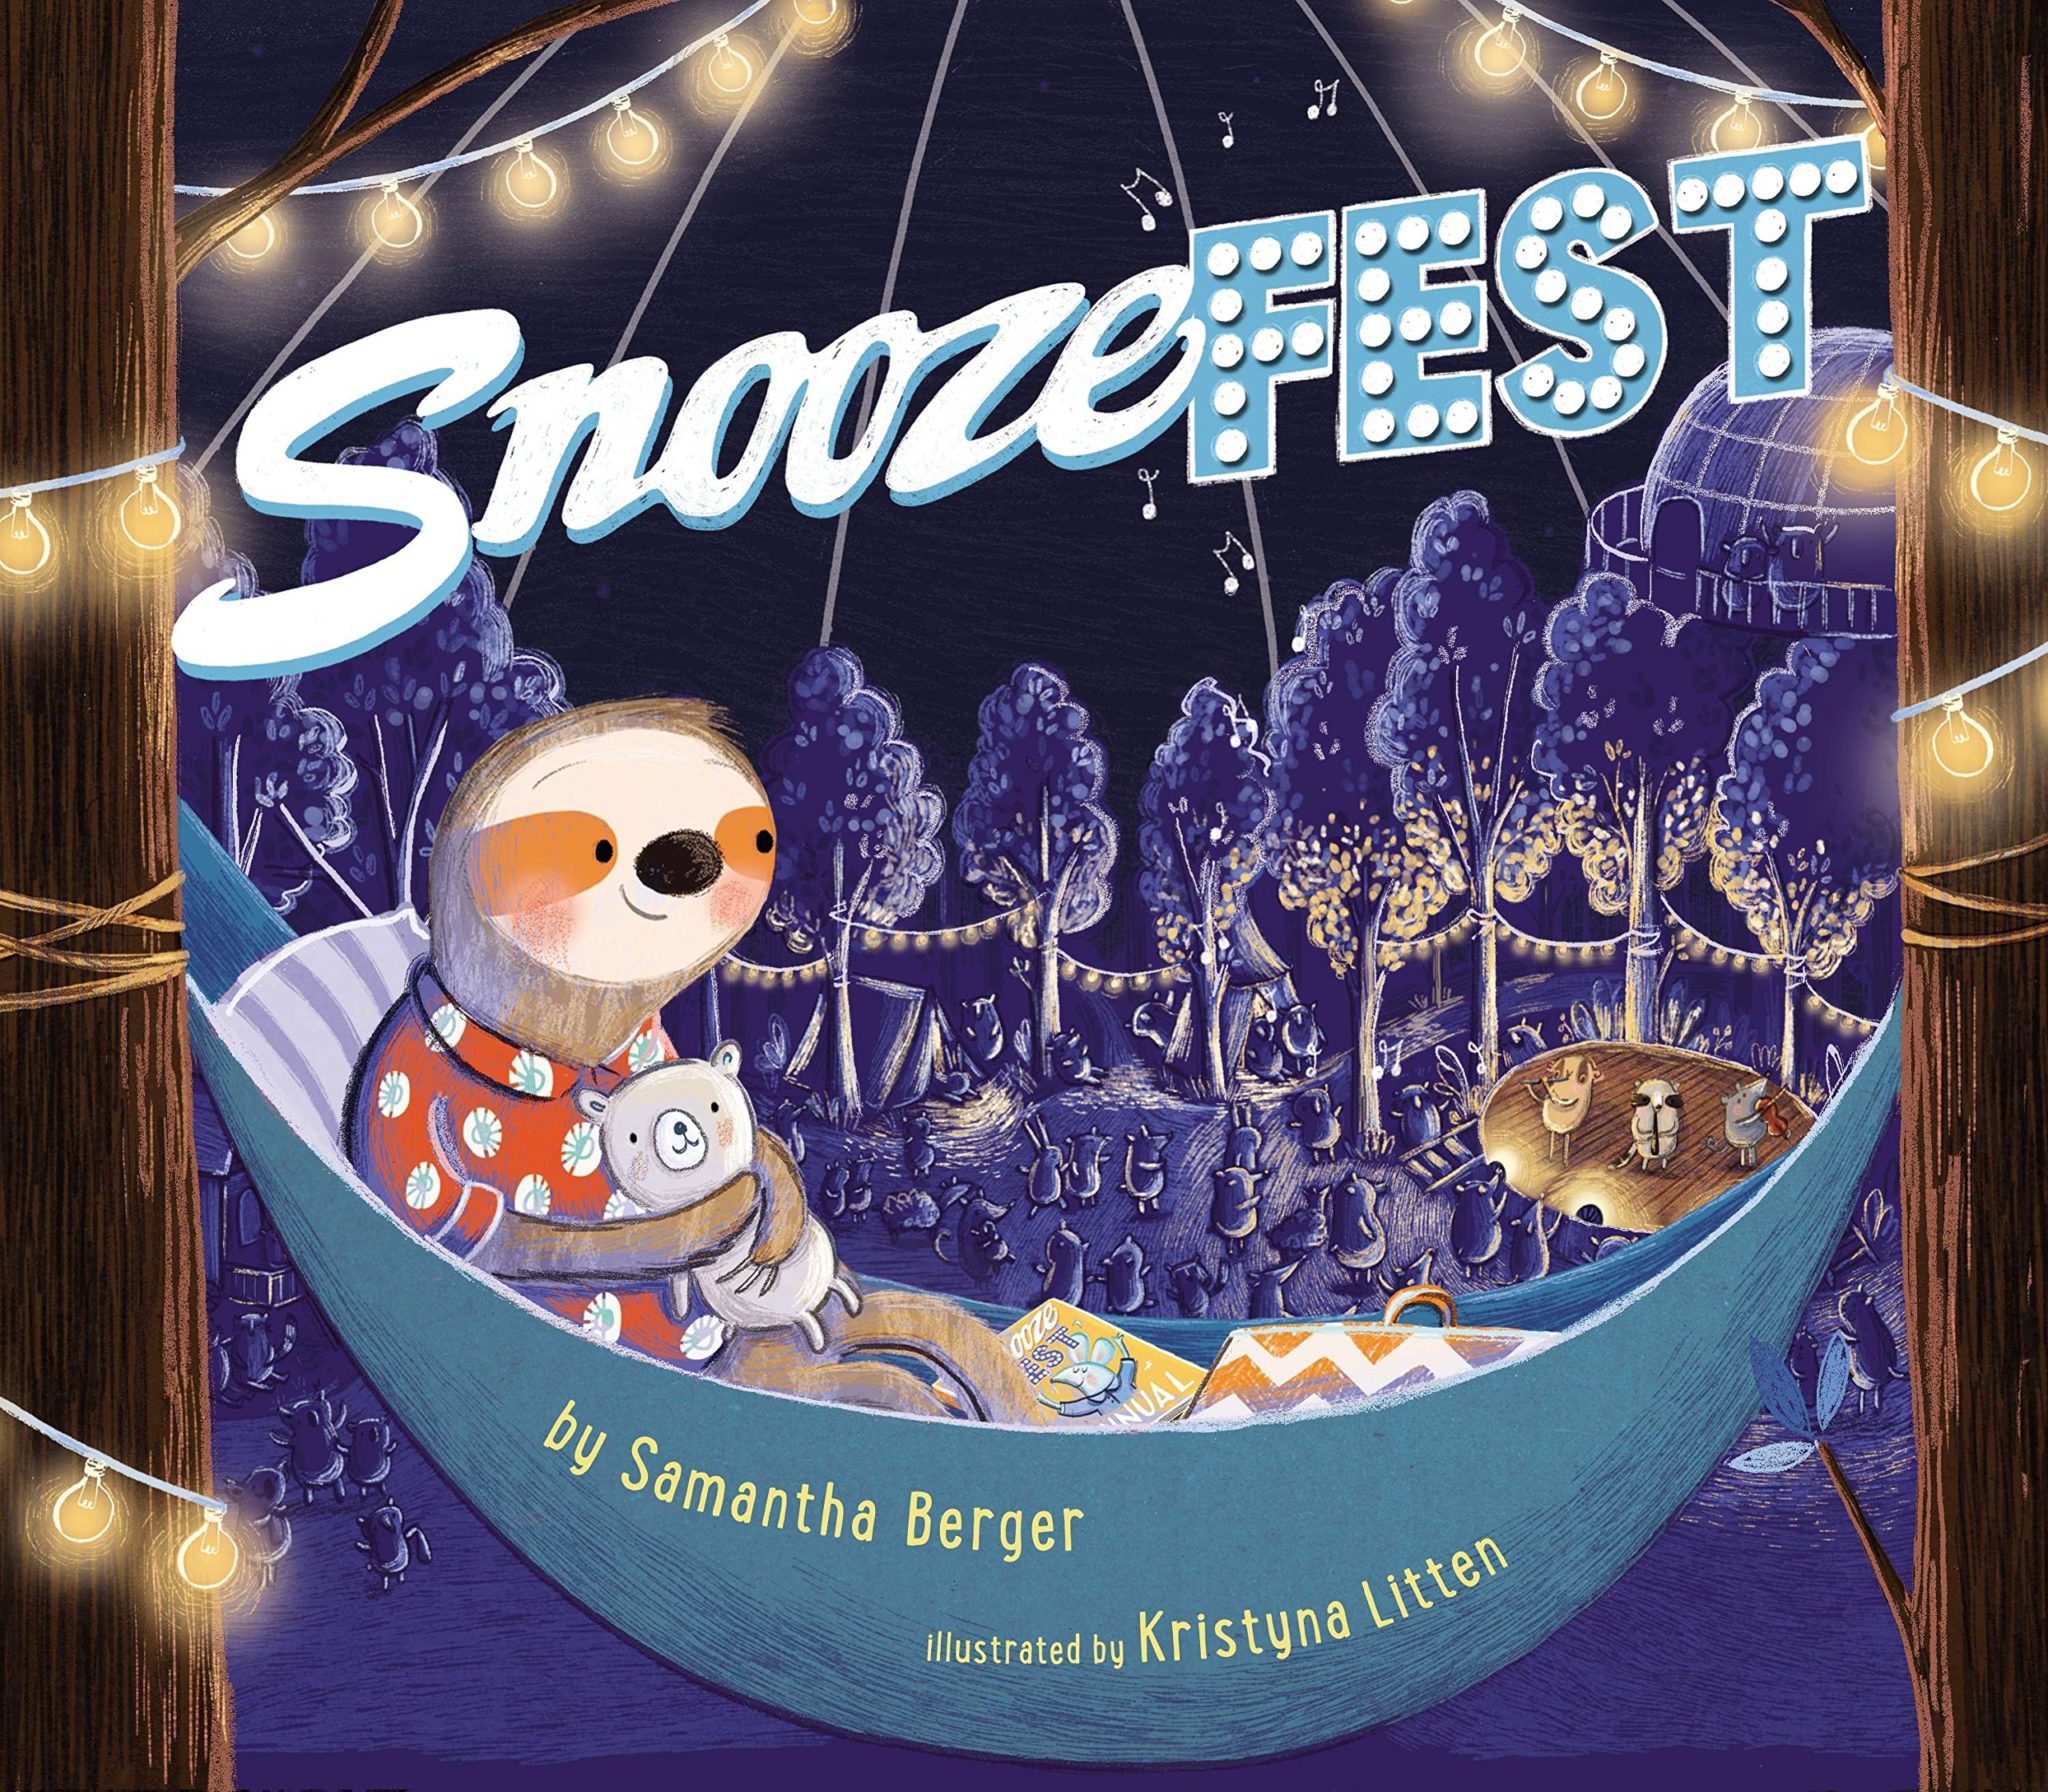 The cover of the picture book "Snoozefest at the Nuzzledome" features a sloth snuggled in a hammock overlooking a music festival stage.